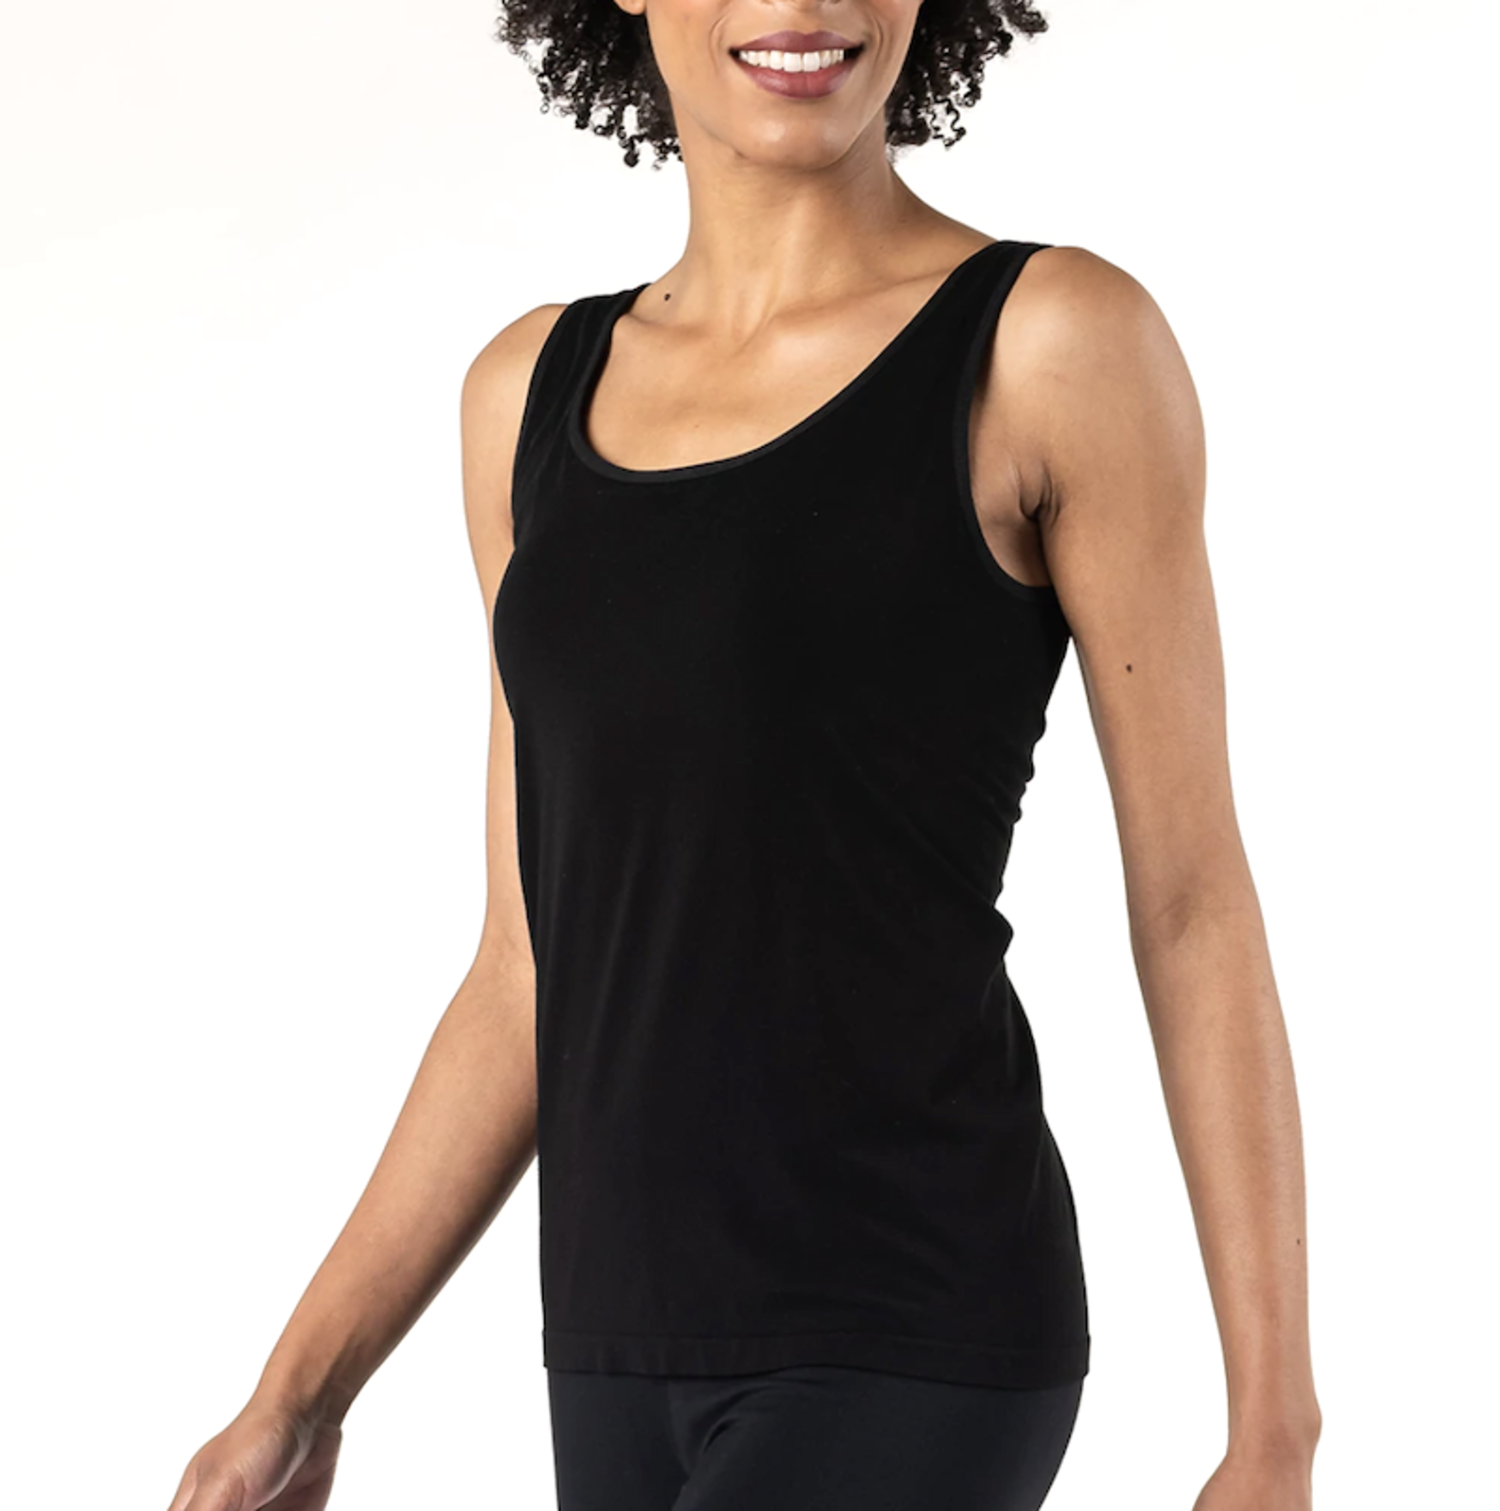 UK Women's Seamless Tank Tops Camisole with Built in Bra Corset